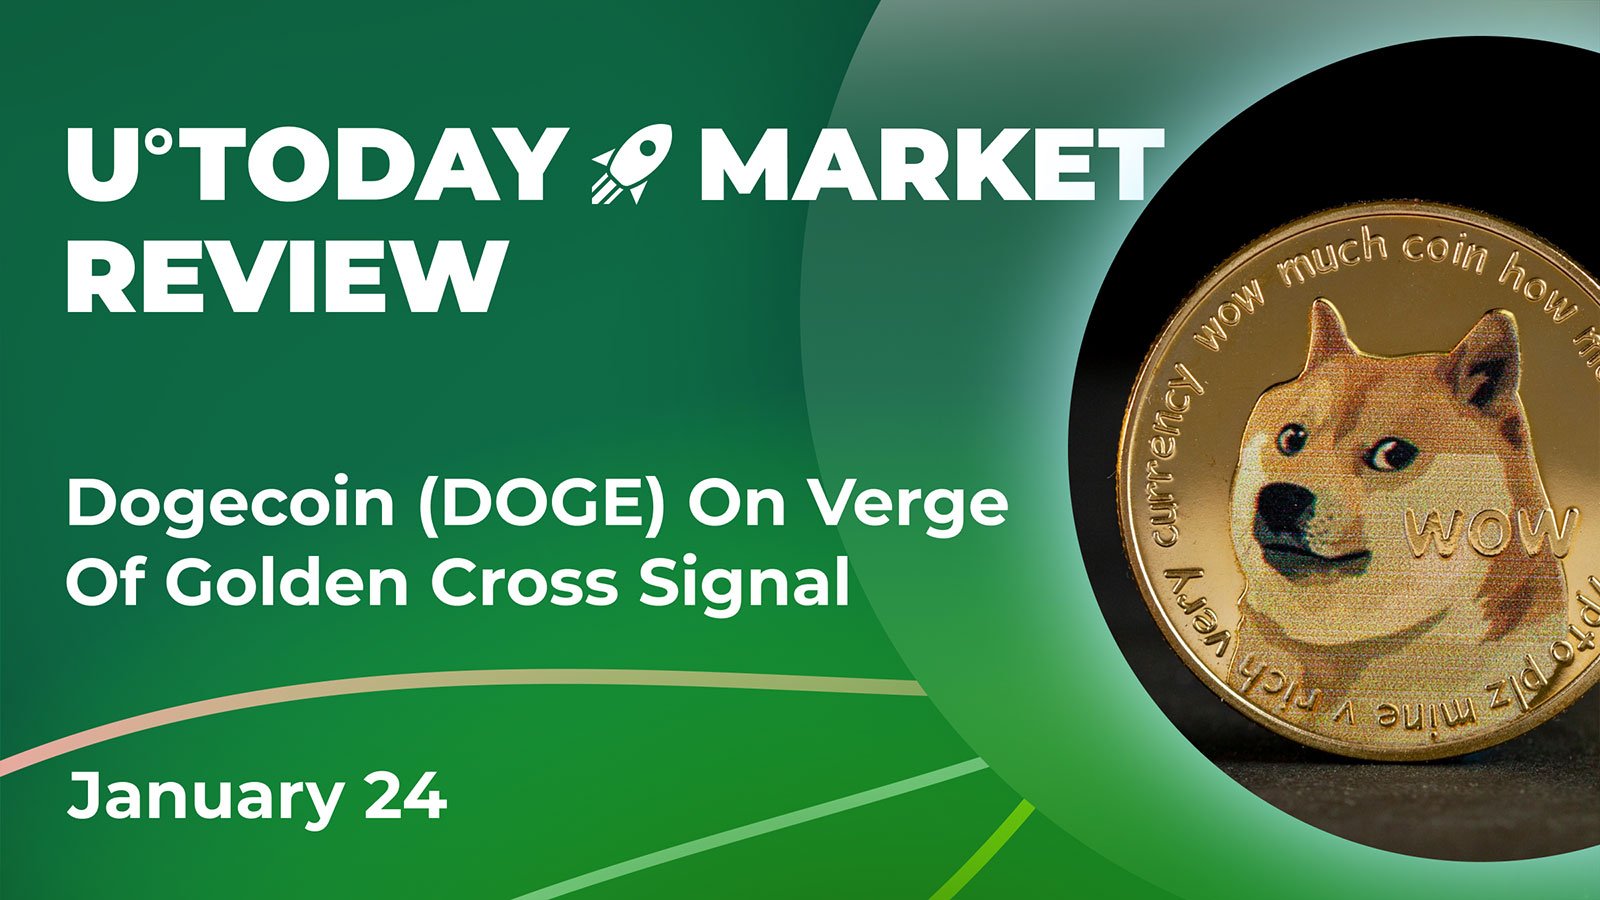 Dogecoin (DOGE) On Verge Of Golden Cross Signal: Crypto Market Review, Jan. 24